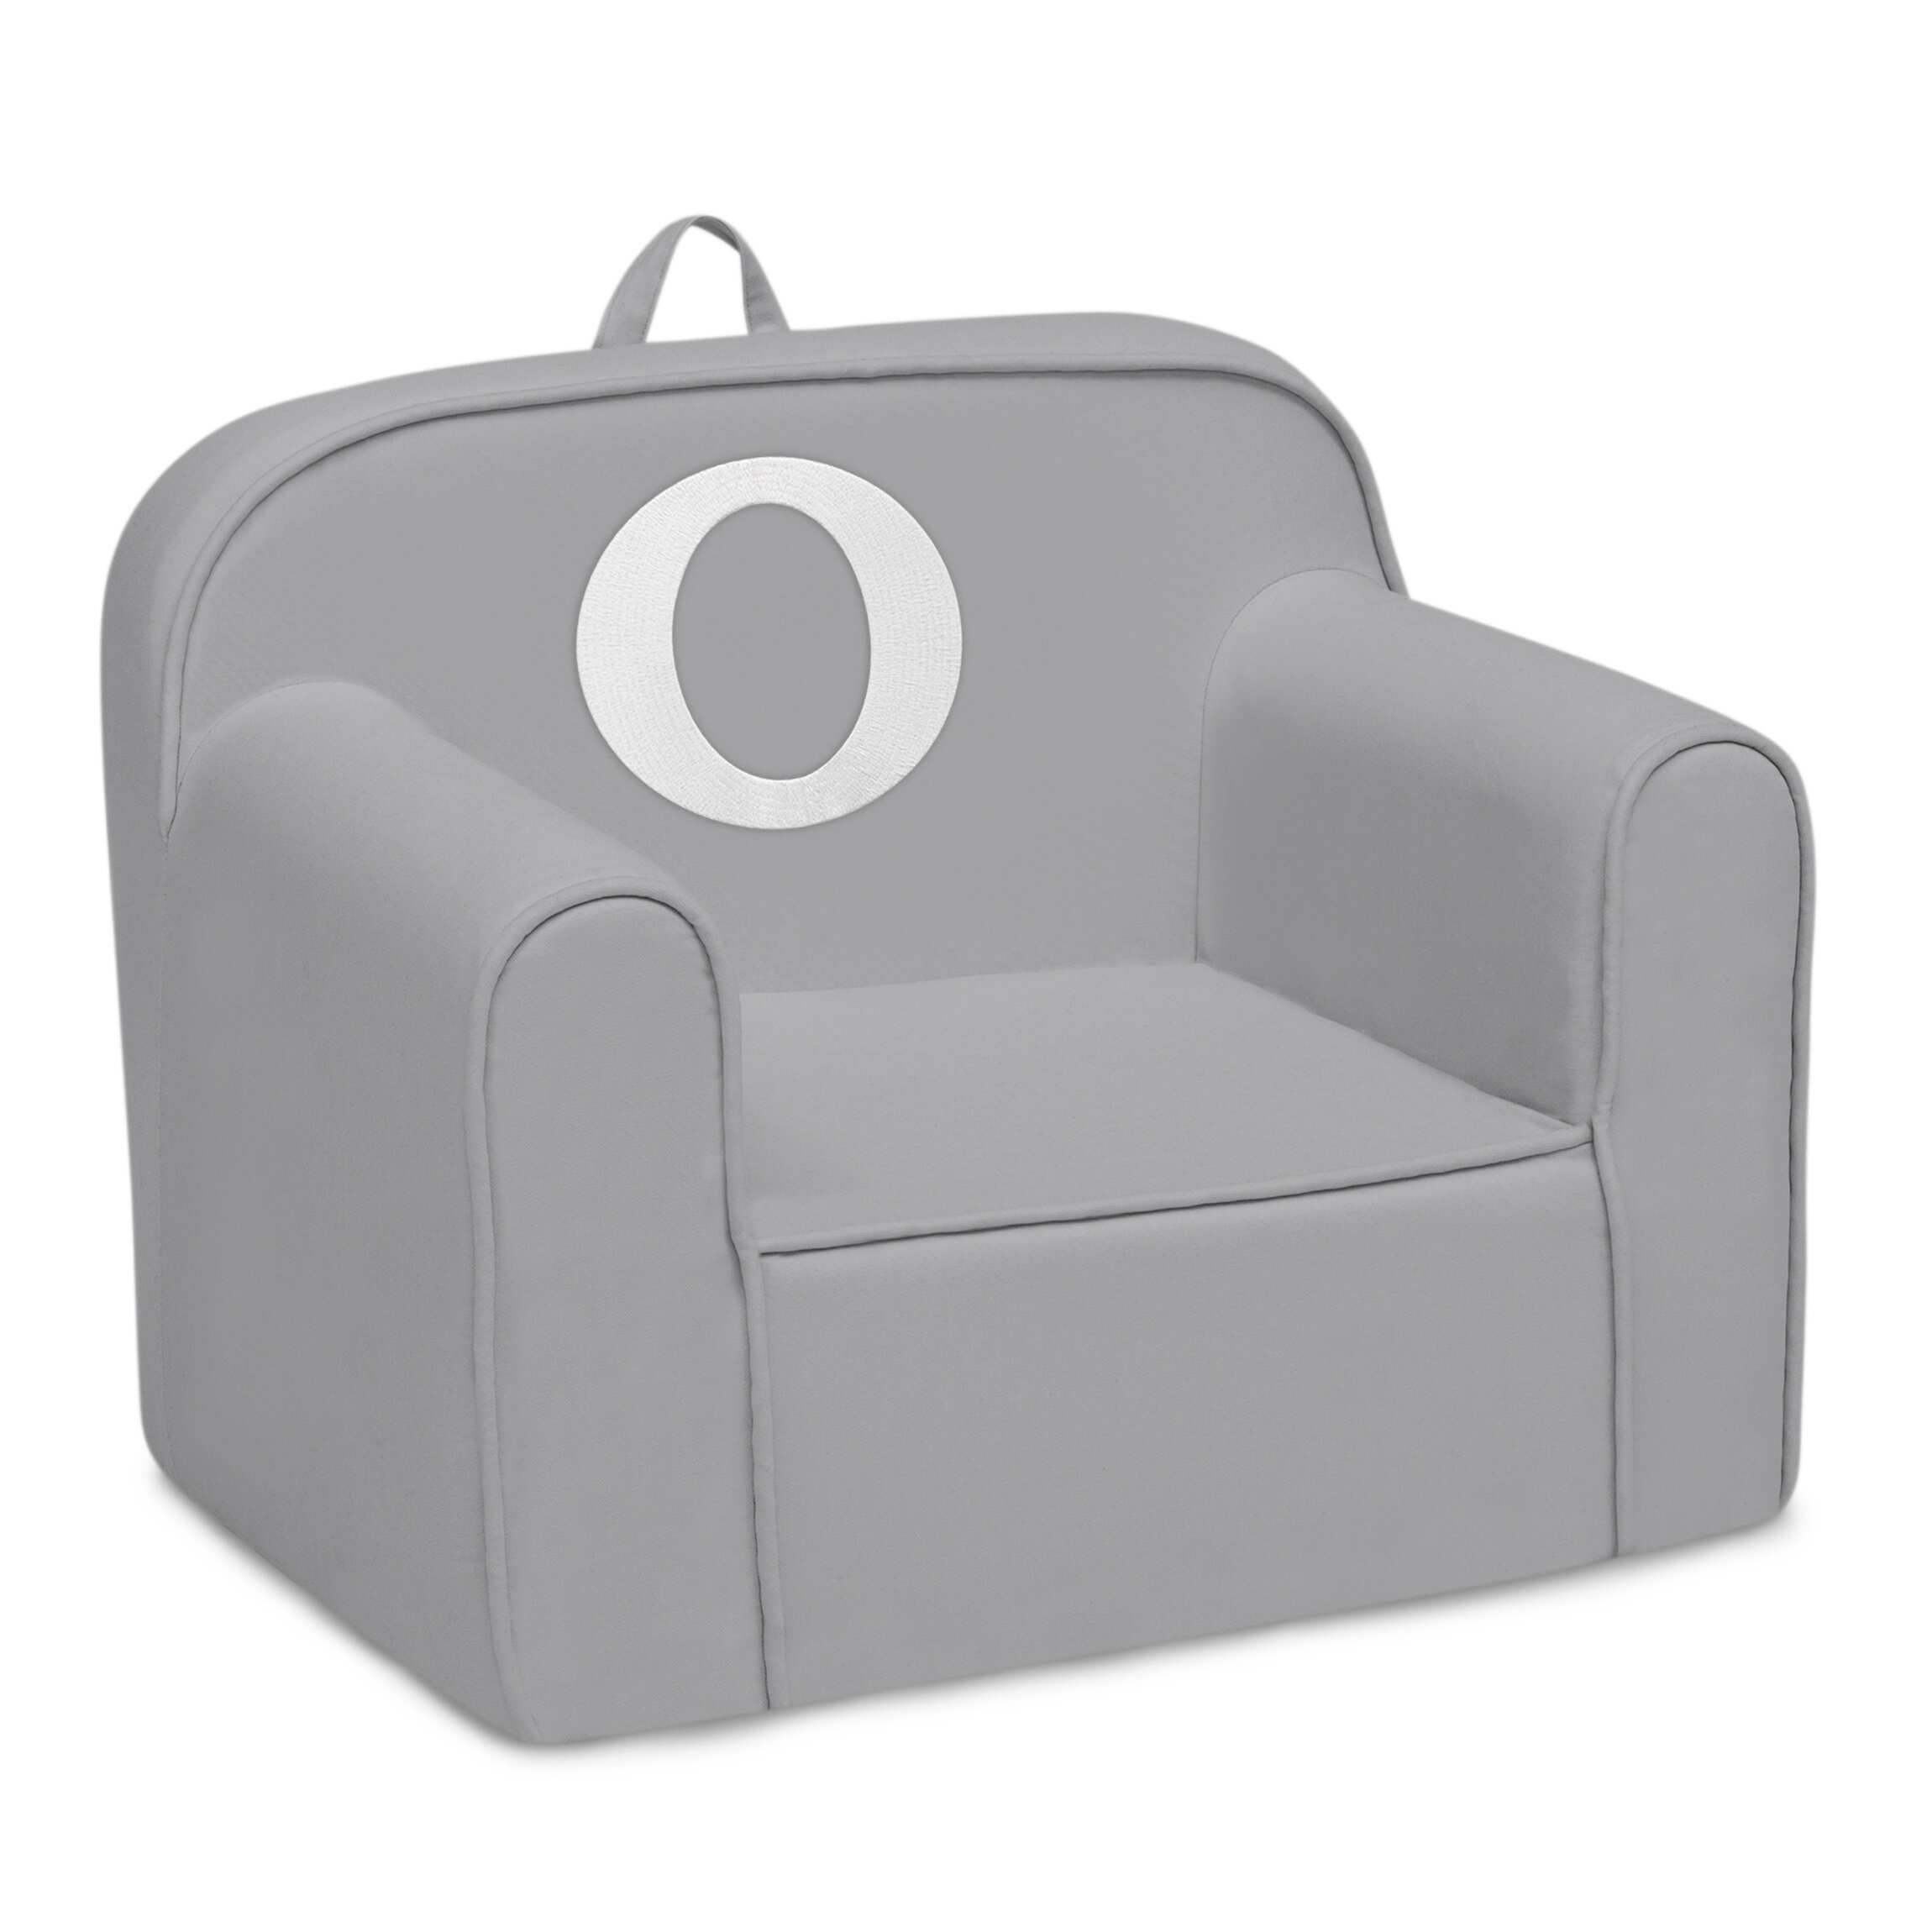 Delta Children Personalized Monogram Cozee Chair - Customize with Letter O